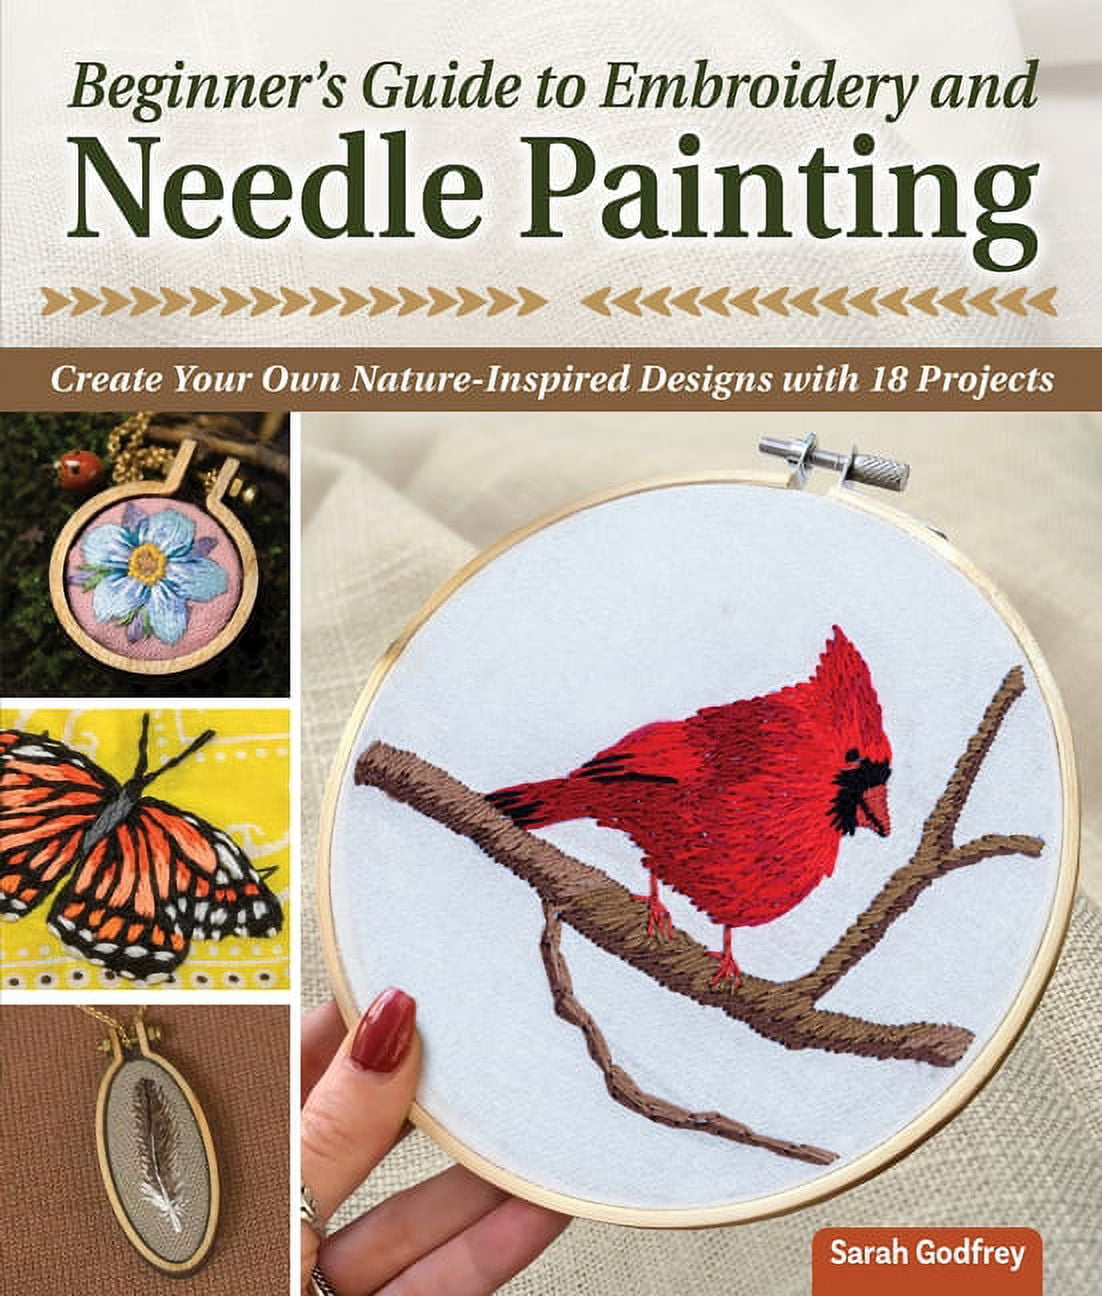 Embroidery : A Step-By-Step Guide to More Than 200 Stitches (Paperback) -  Walmart.com